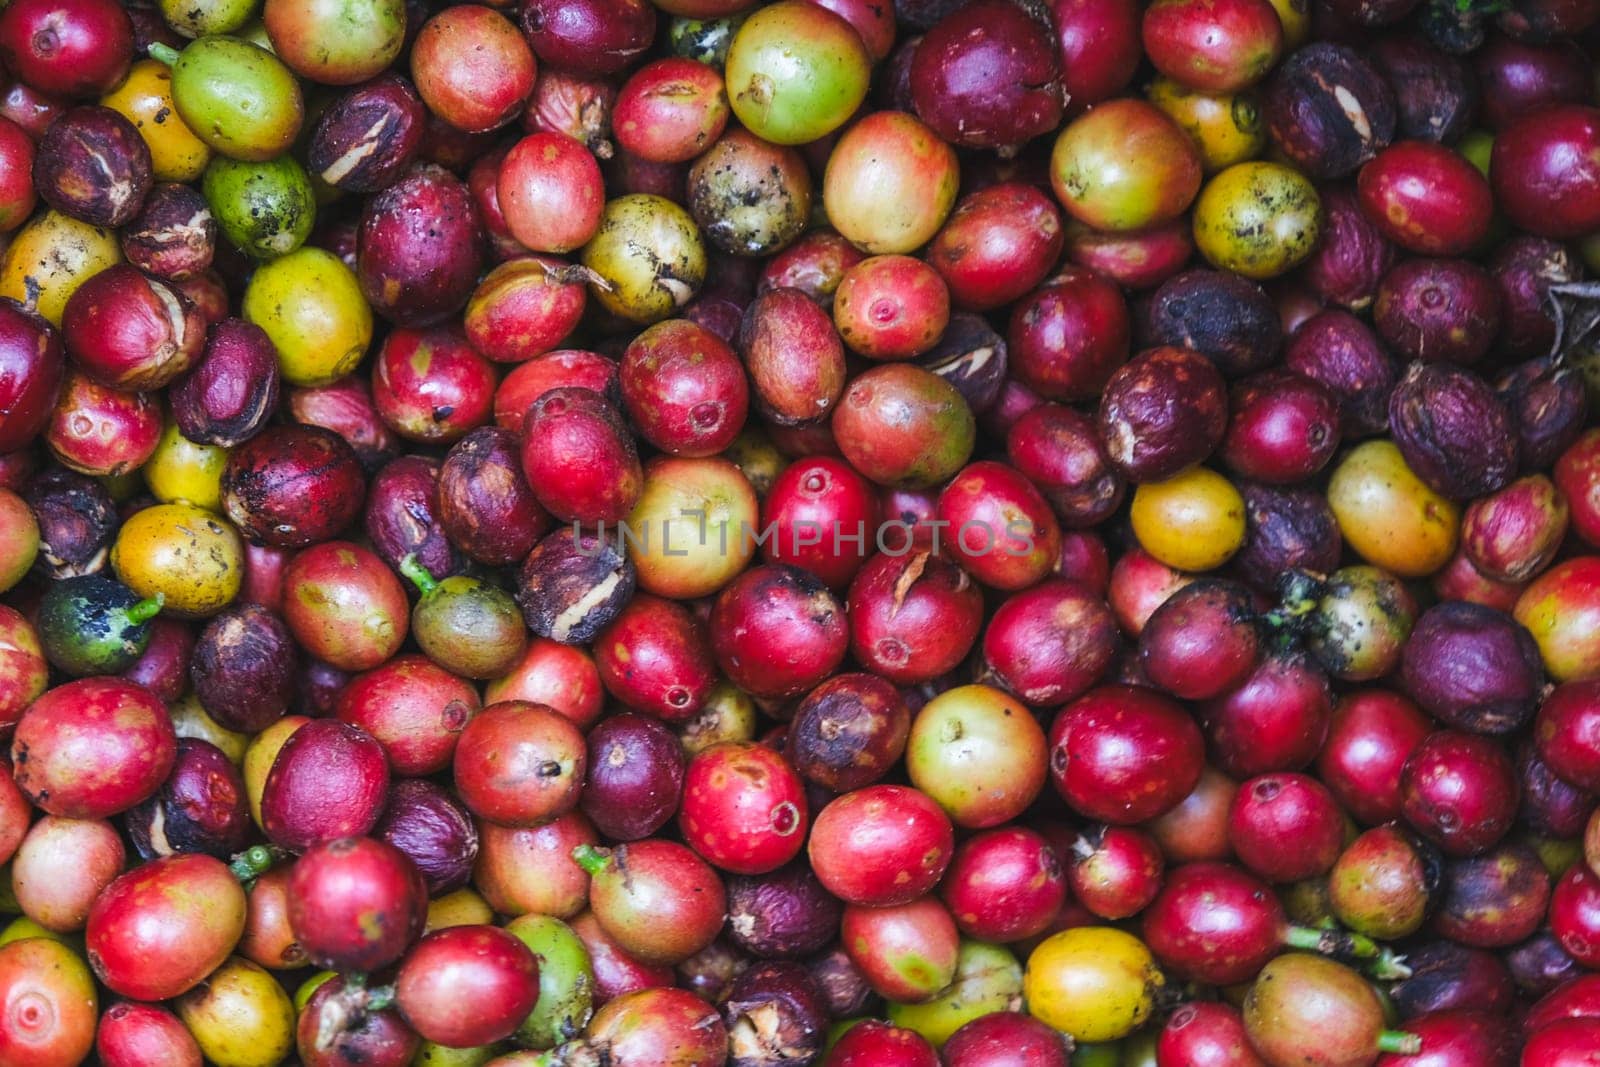 Red coffee beans as background. Close-up of Arabica coffee berries.